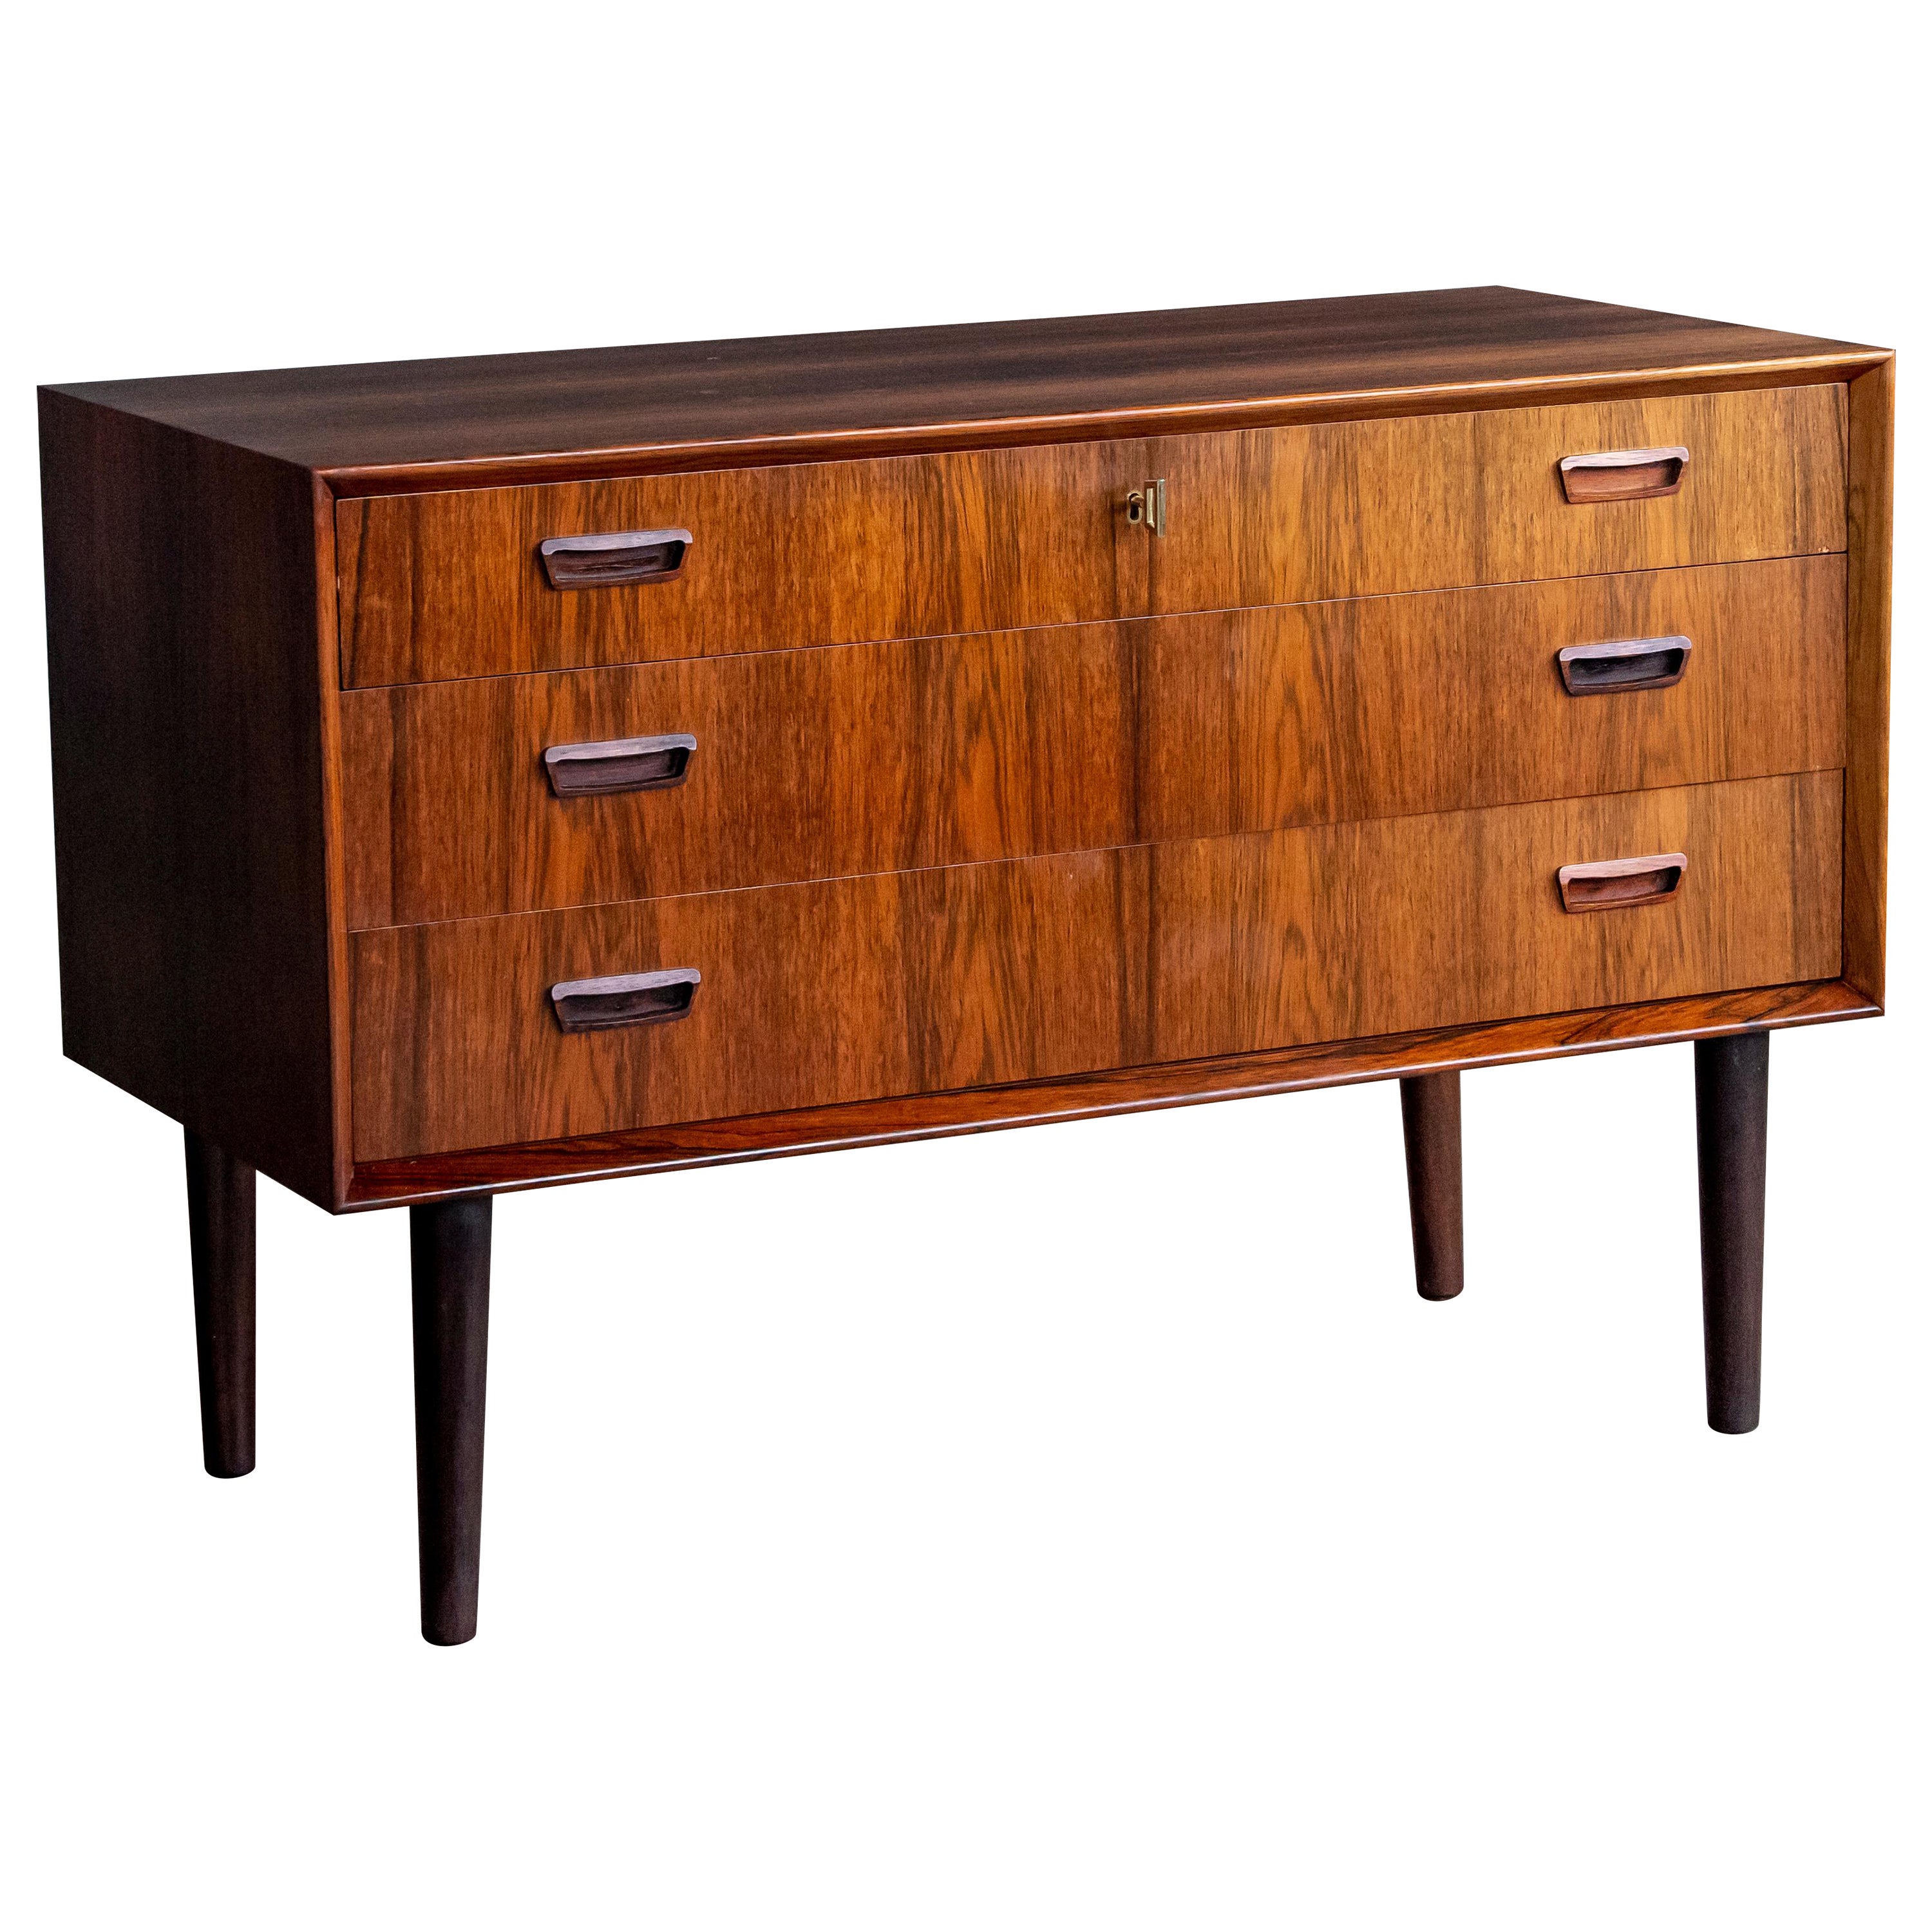 Danish Midcentury Medium Size Chest of Drawers in Rosewood by Johs. Sorth